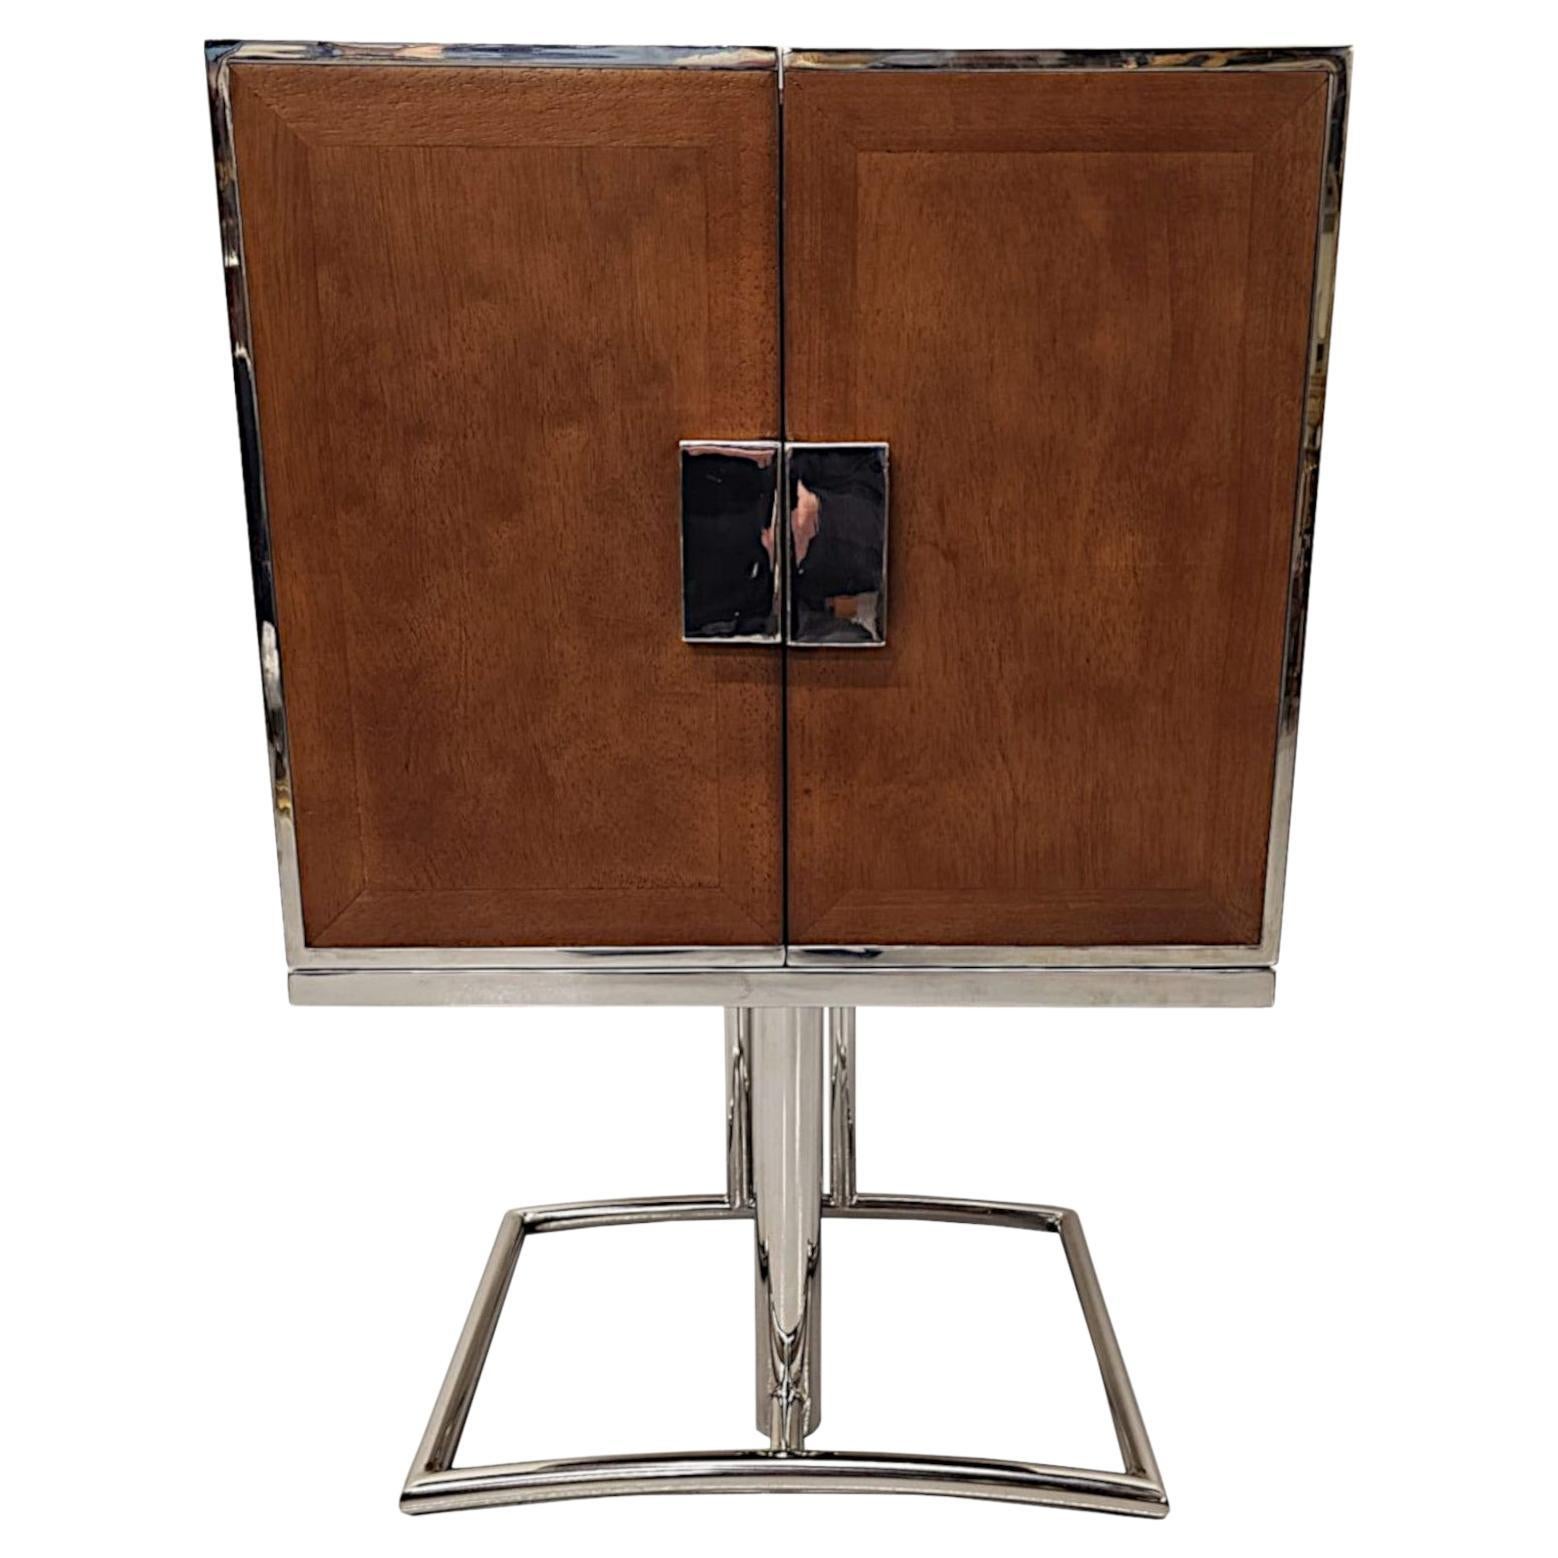 A Stunning Art Deco Design Cherrywood and Chrome Drinks Cabinet or Bar